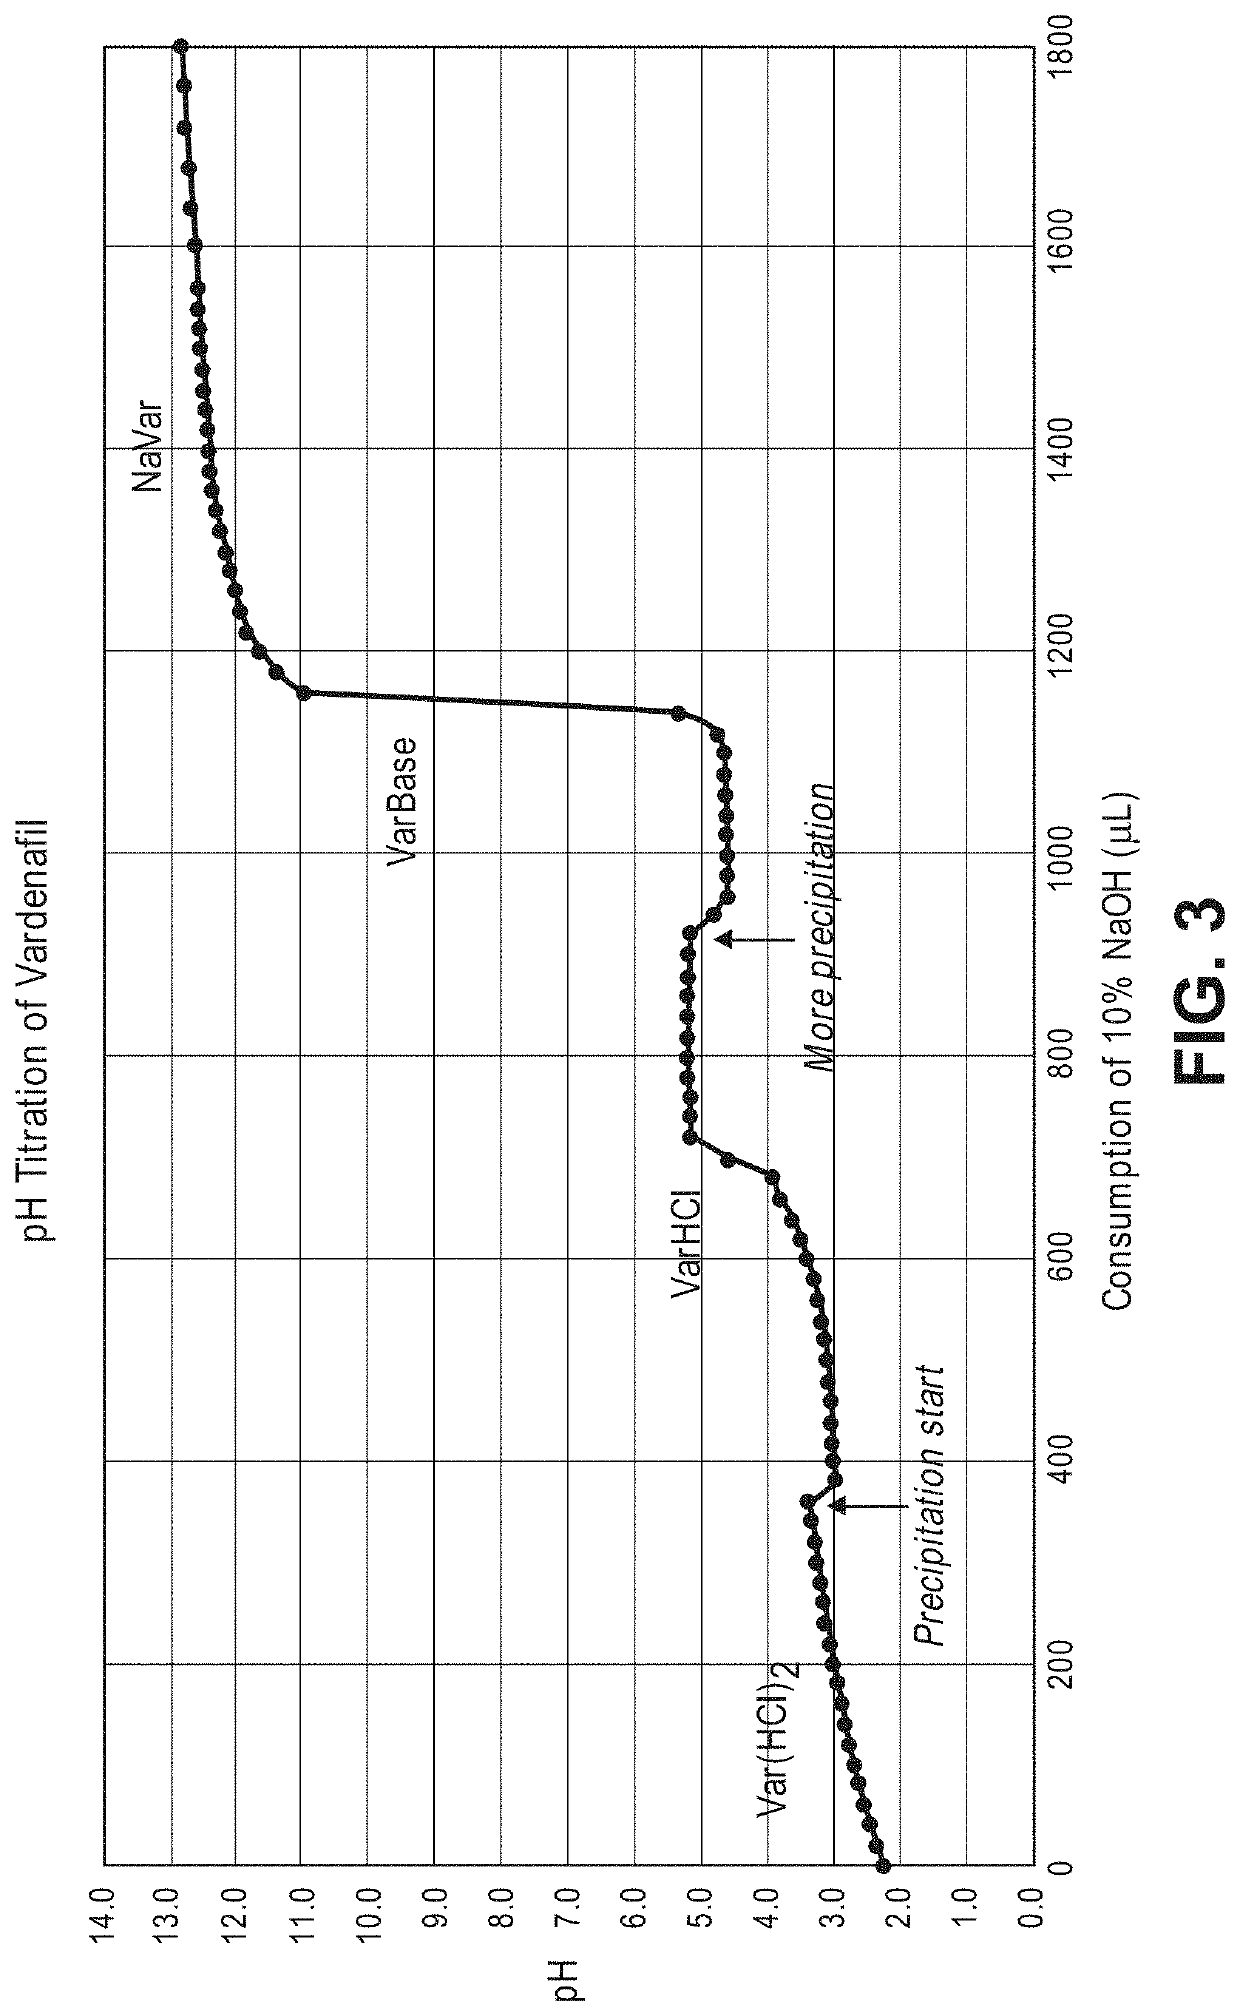 Pde5 inhibitor powder formulations and methods relating thereto